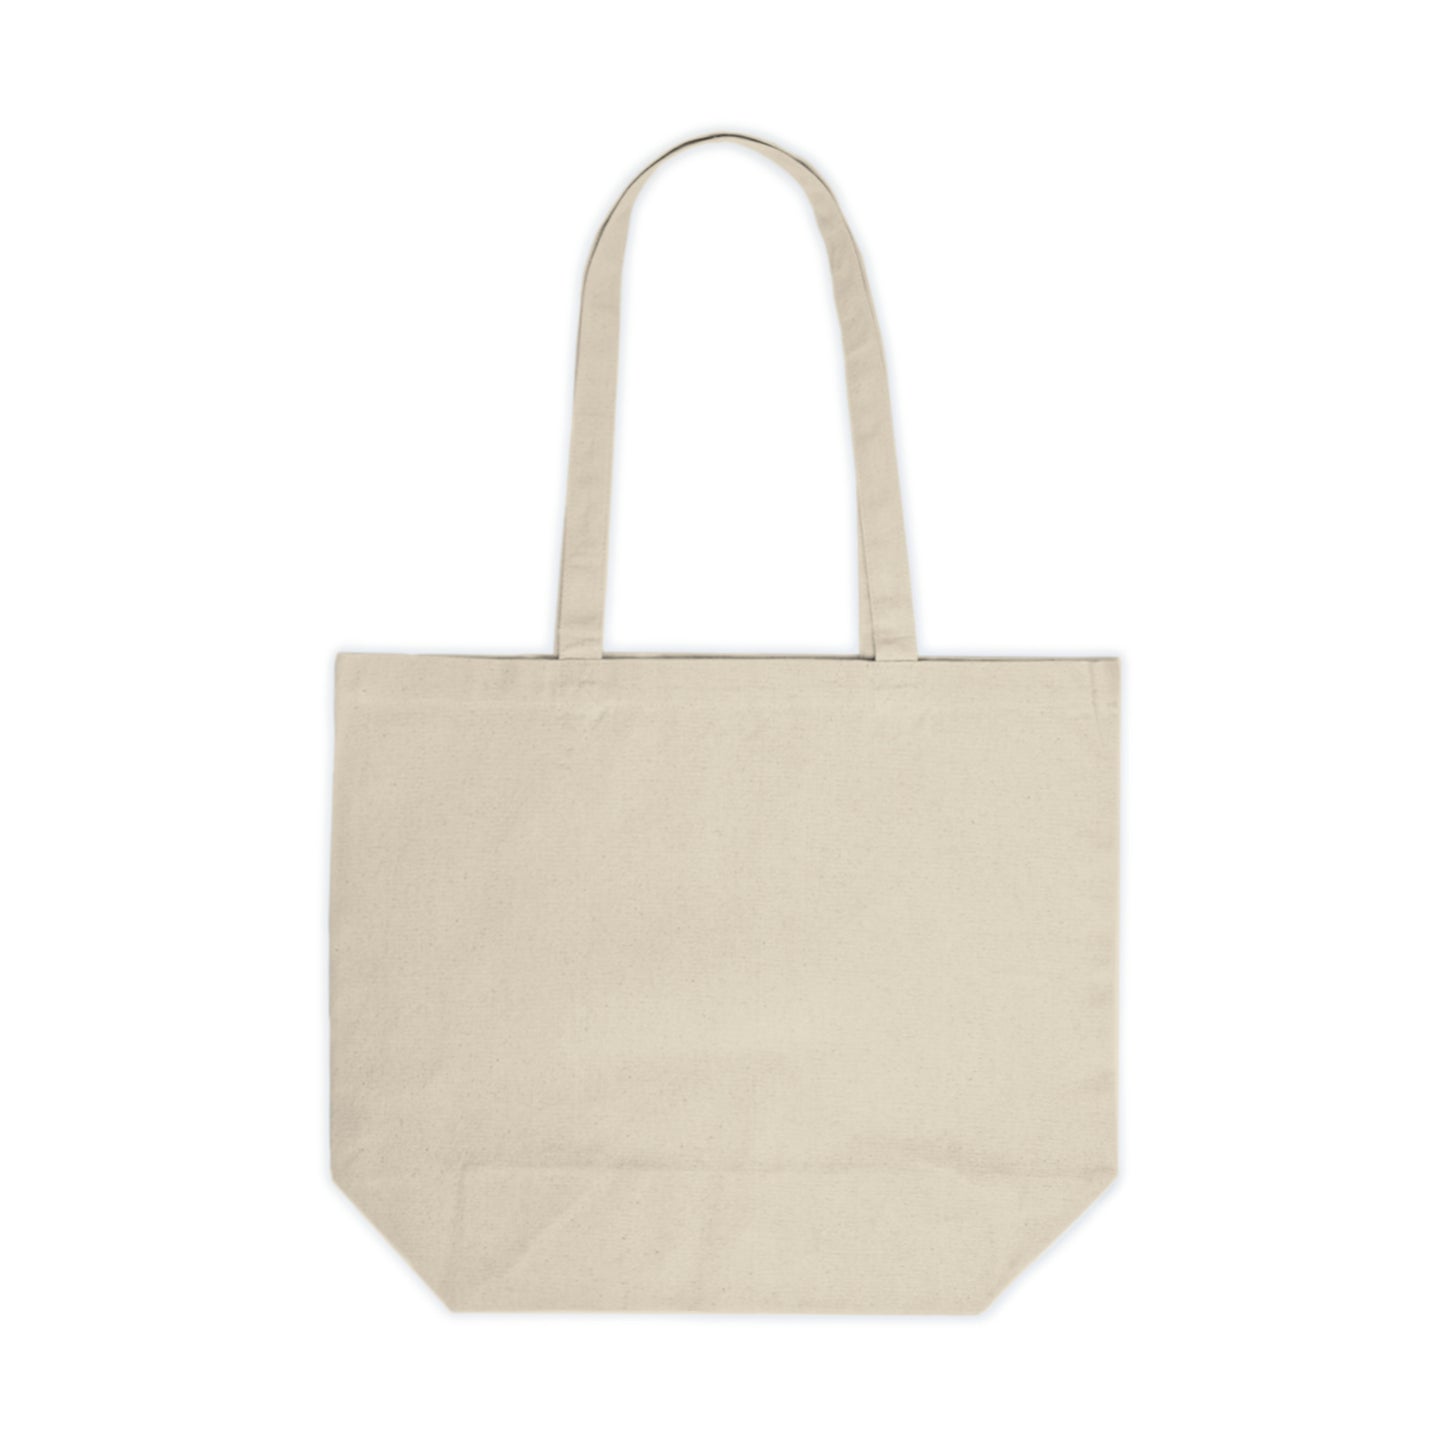 Blue Heron - Canvas Shopping Tote